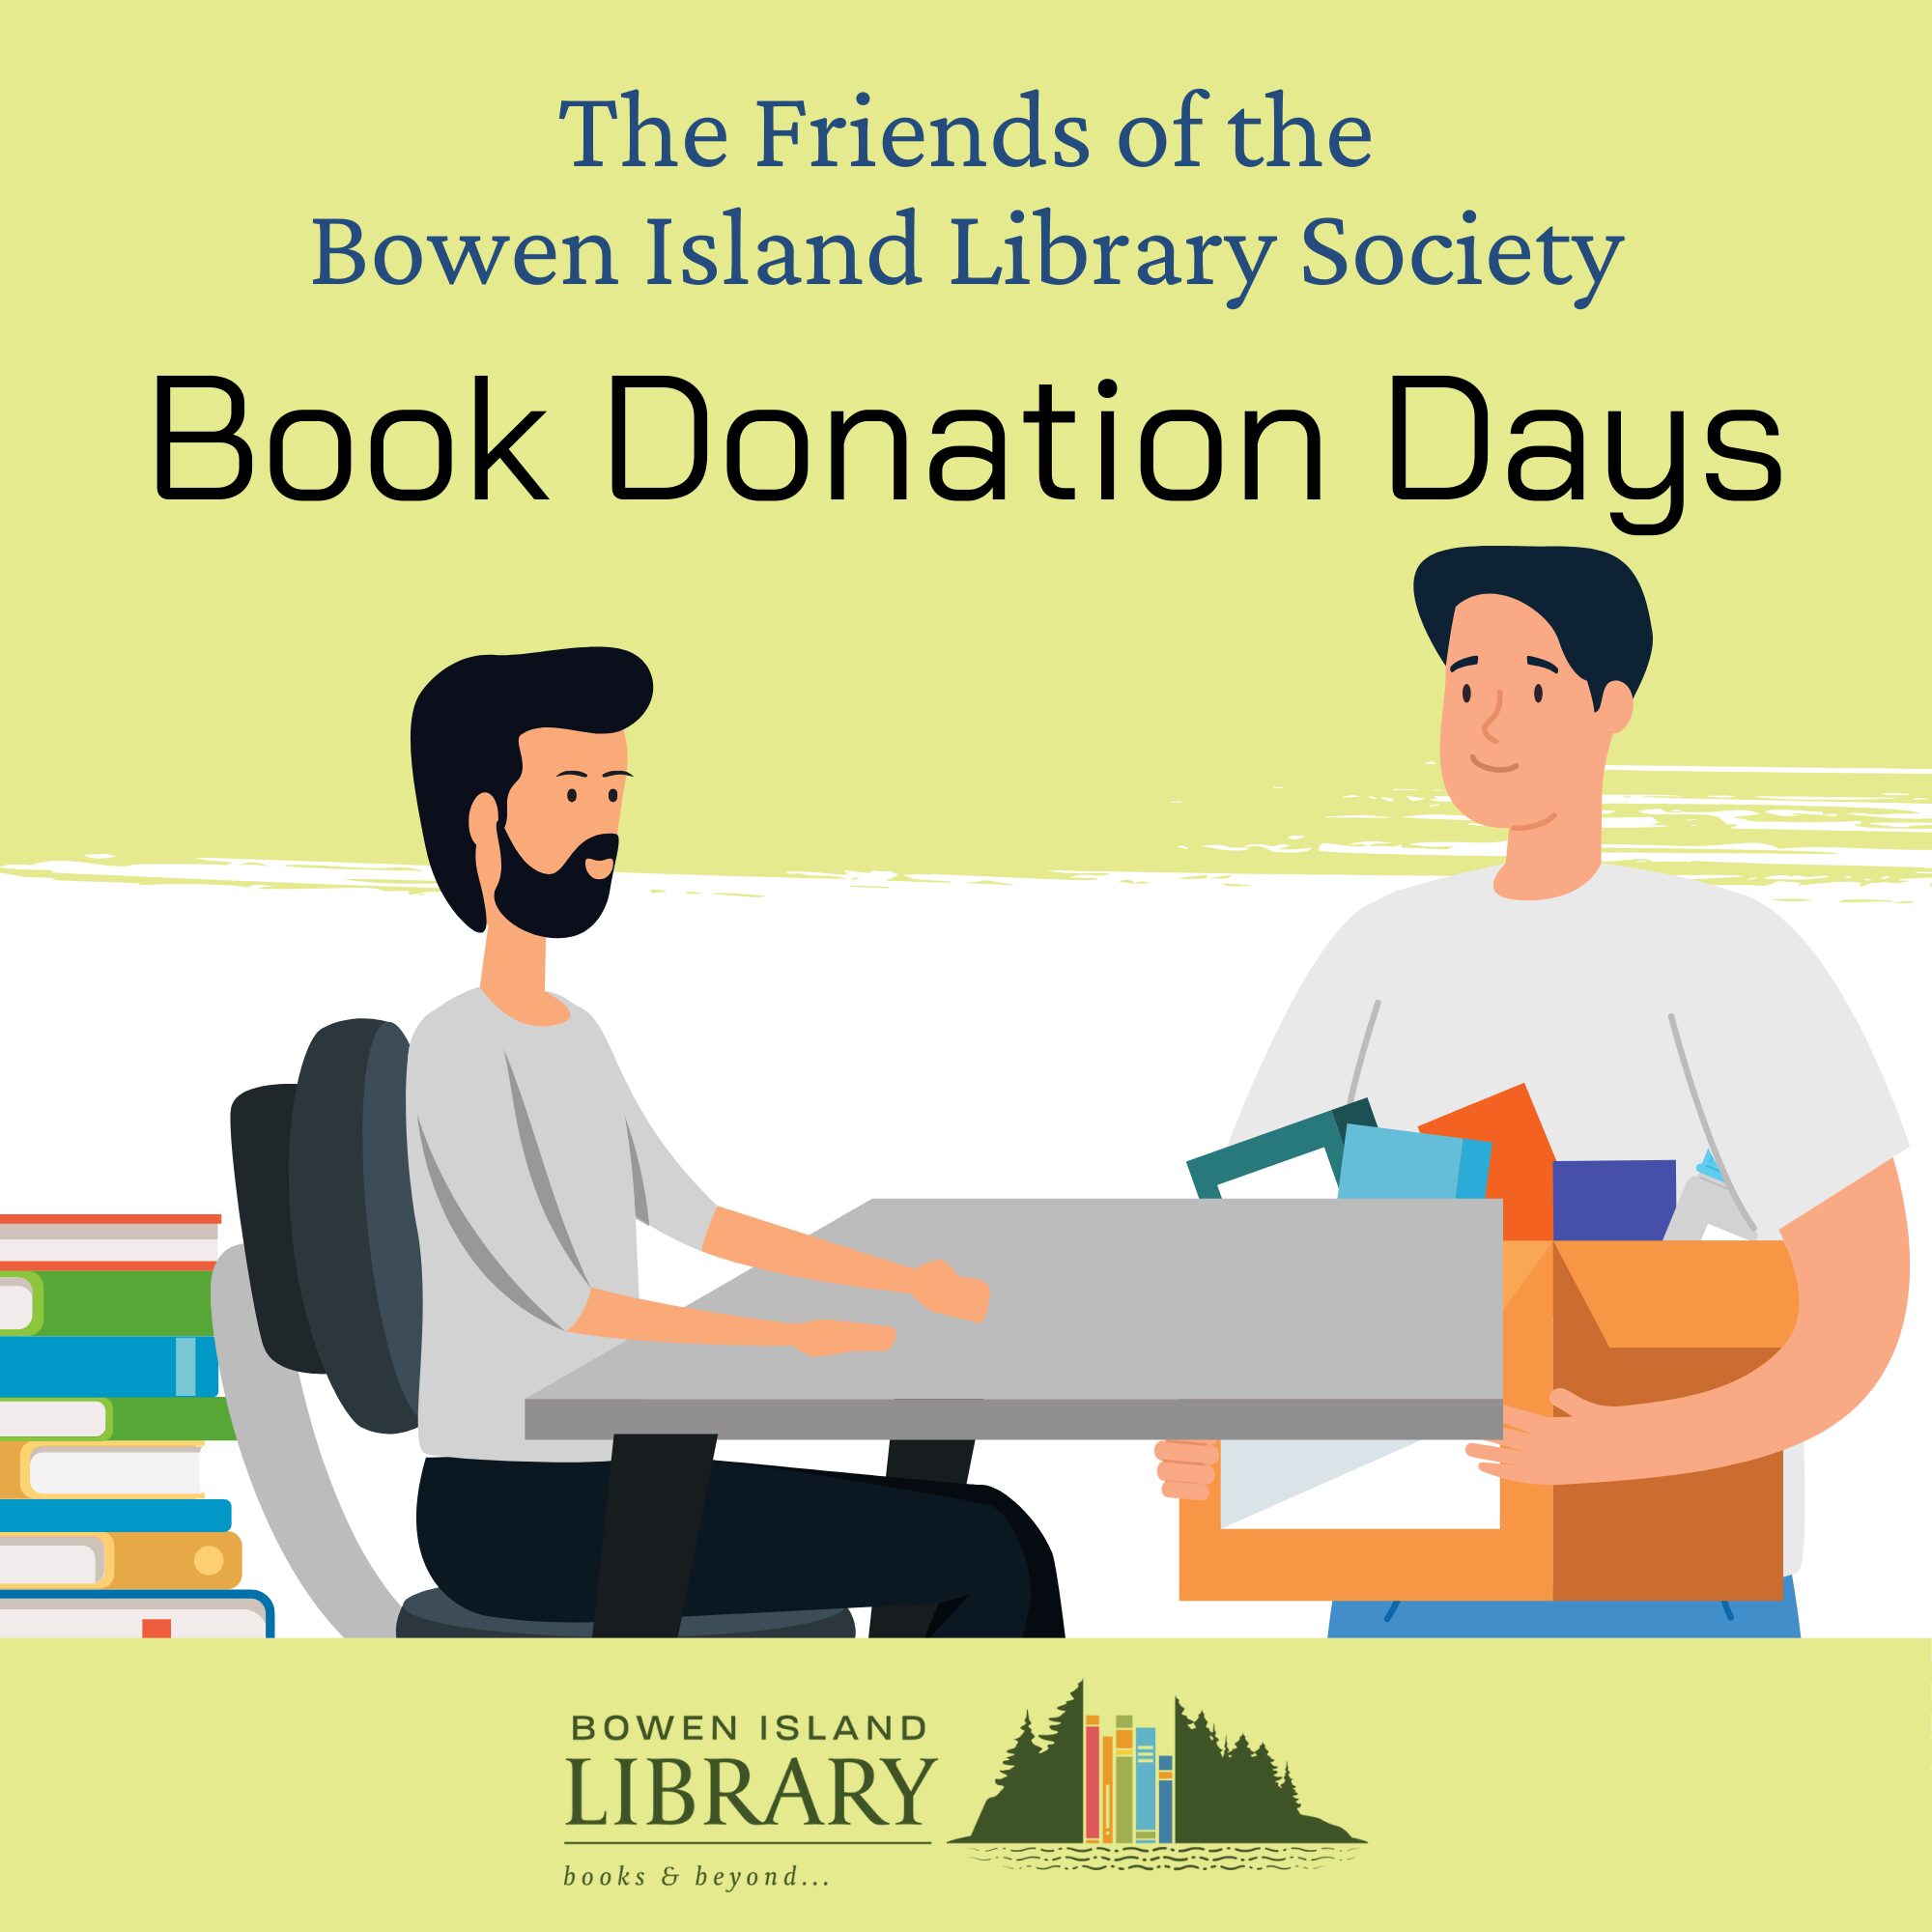 two men exchanging a box of books illustration, says book donation days